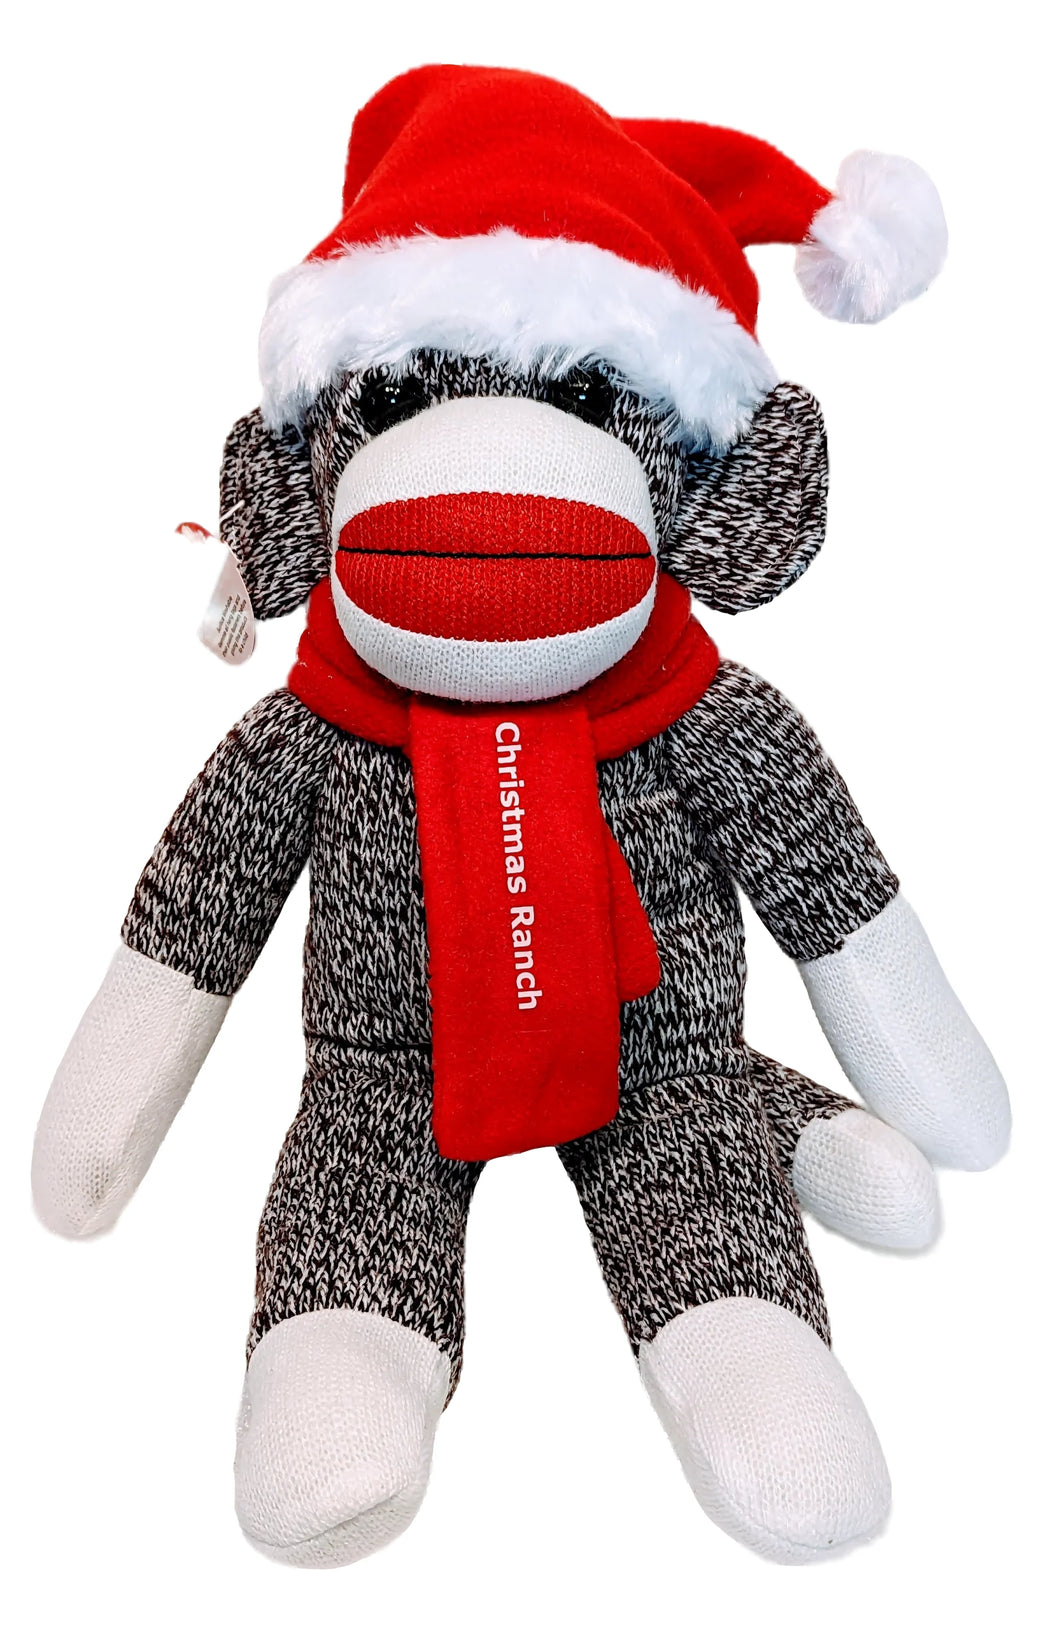 Plush Christmas Sock Monkey with Red Santa Hat & Red Scarf with Christmas Ranch